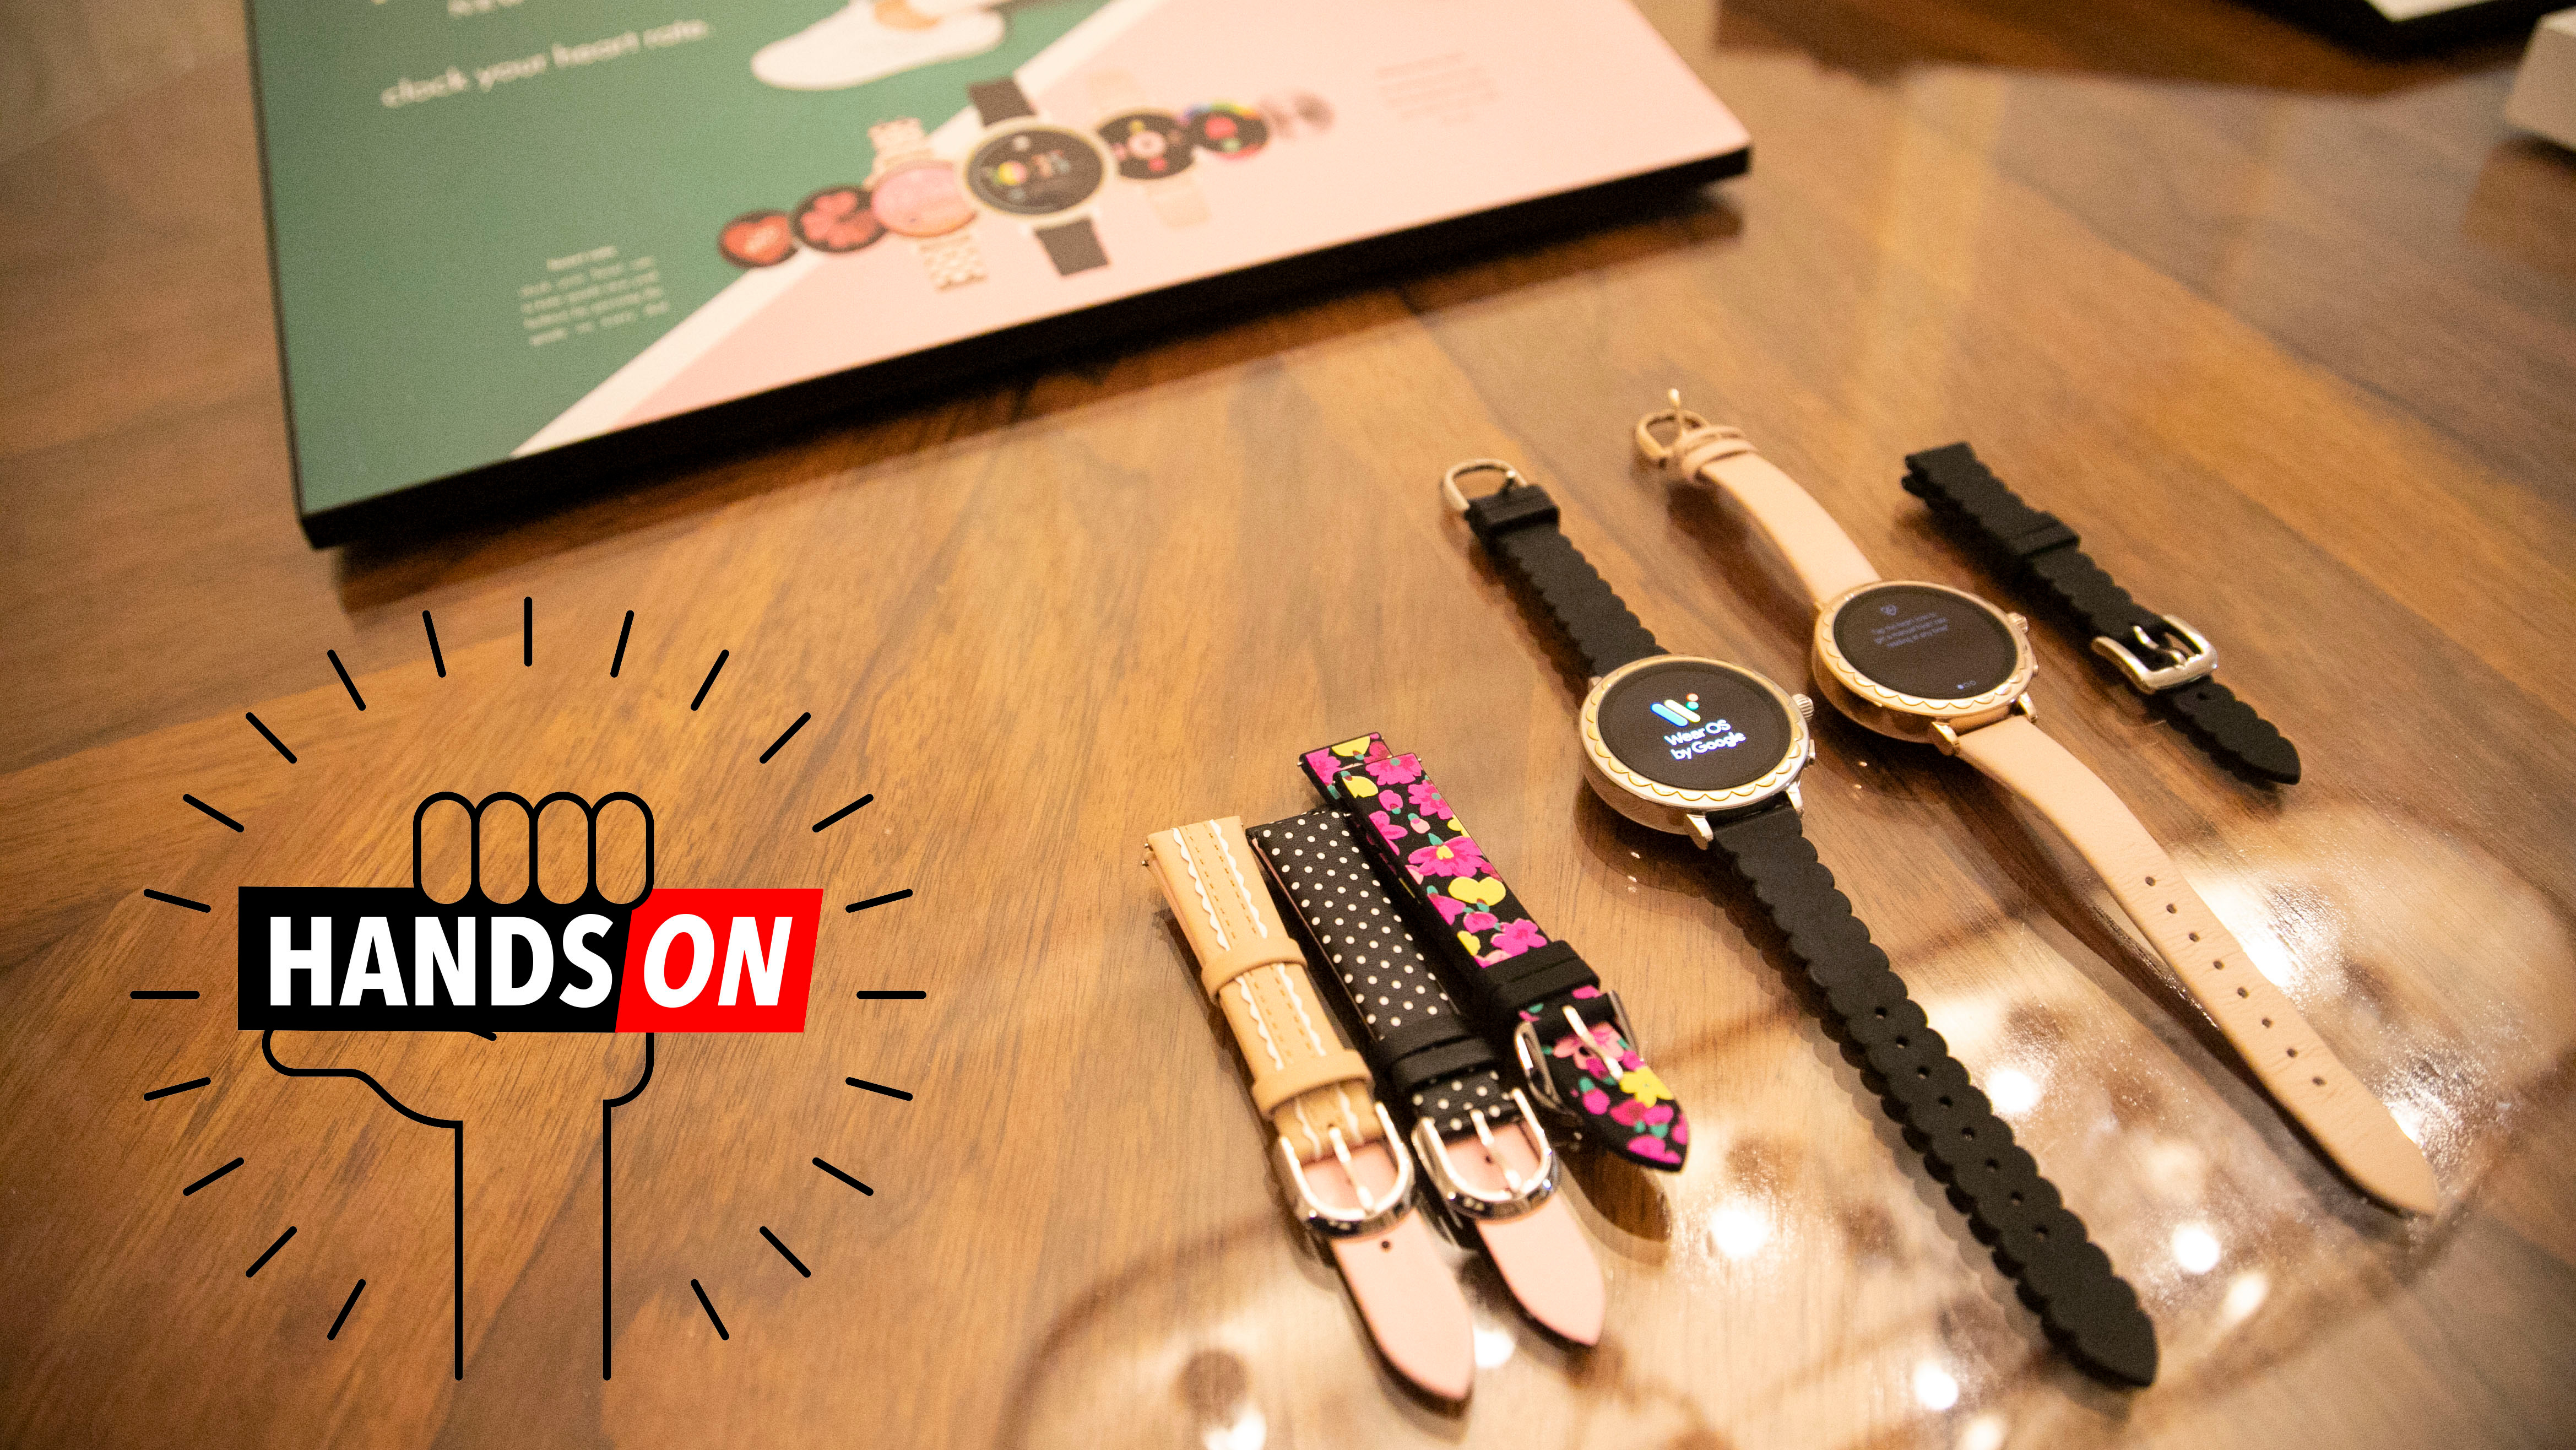 Kate Spade Scallop Smartwatch 2 ハンズオン：お飾りではない 